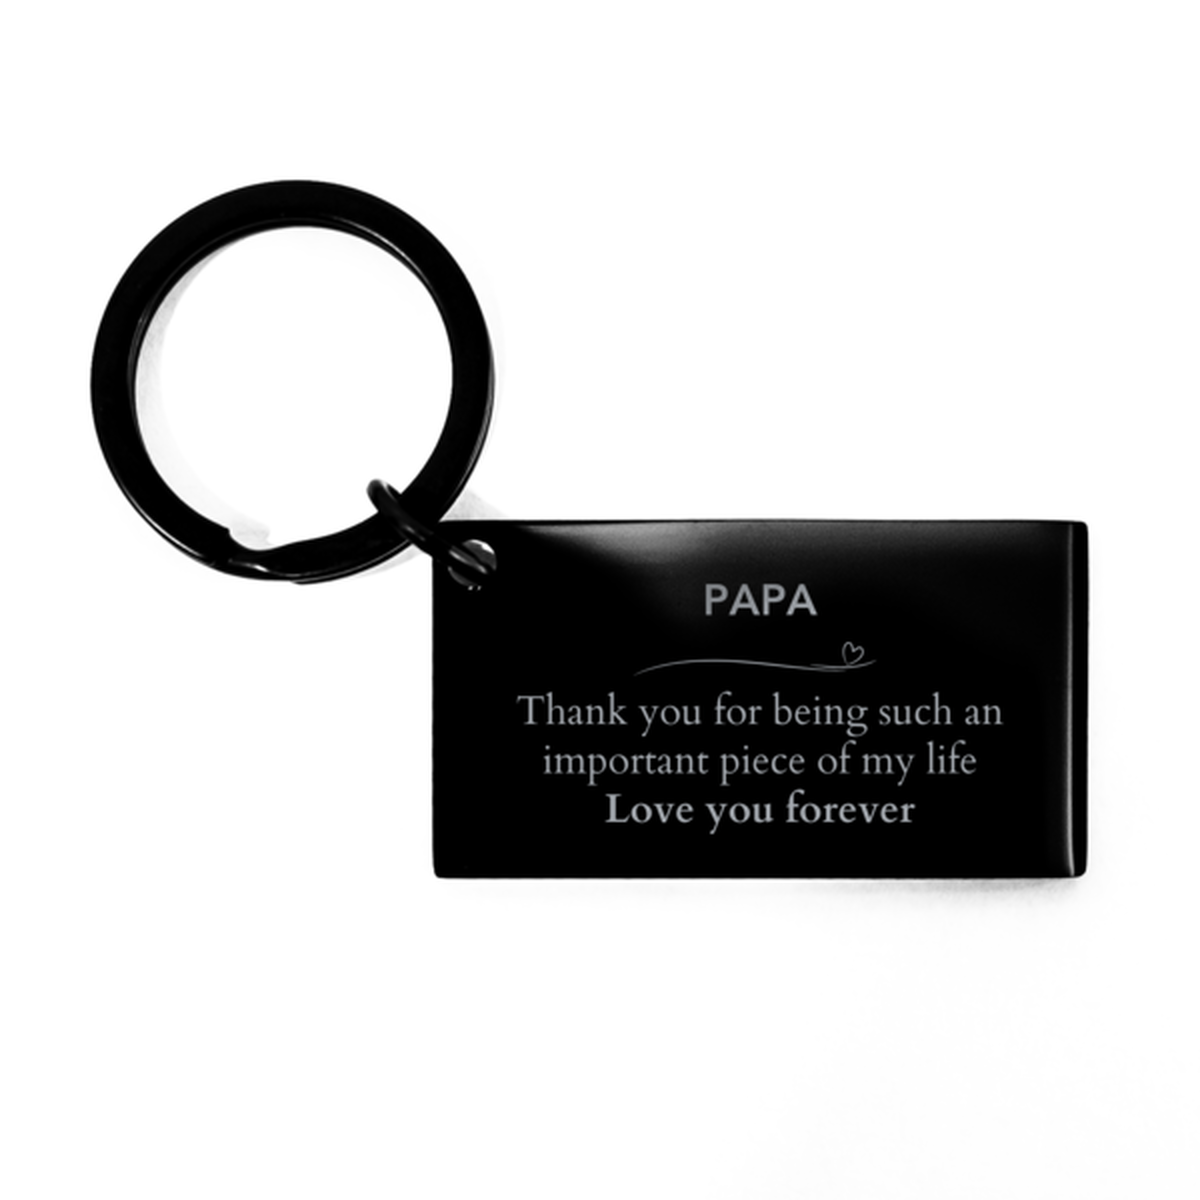 Appropriate Papa Keychain Epic Birthday Gifts for Papa Thank you for being such an important piece of my life Papa Christmas Mothers Fathers Day